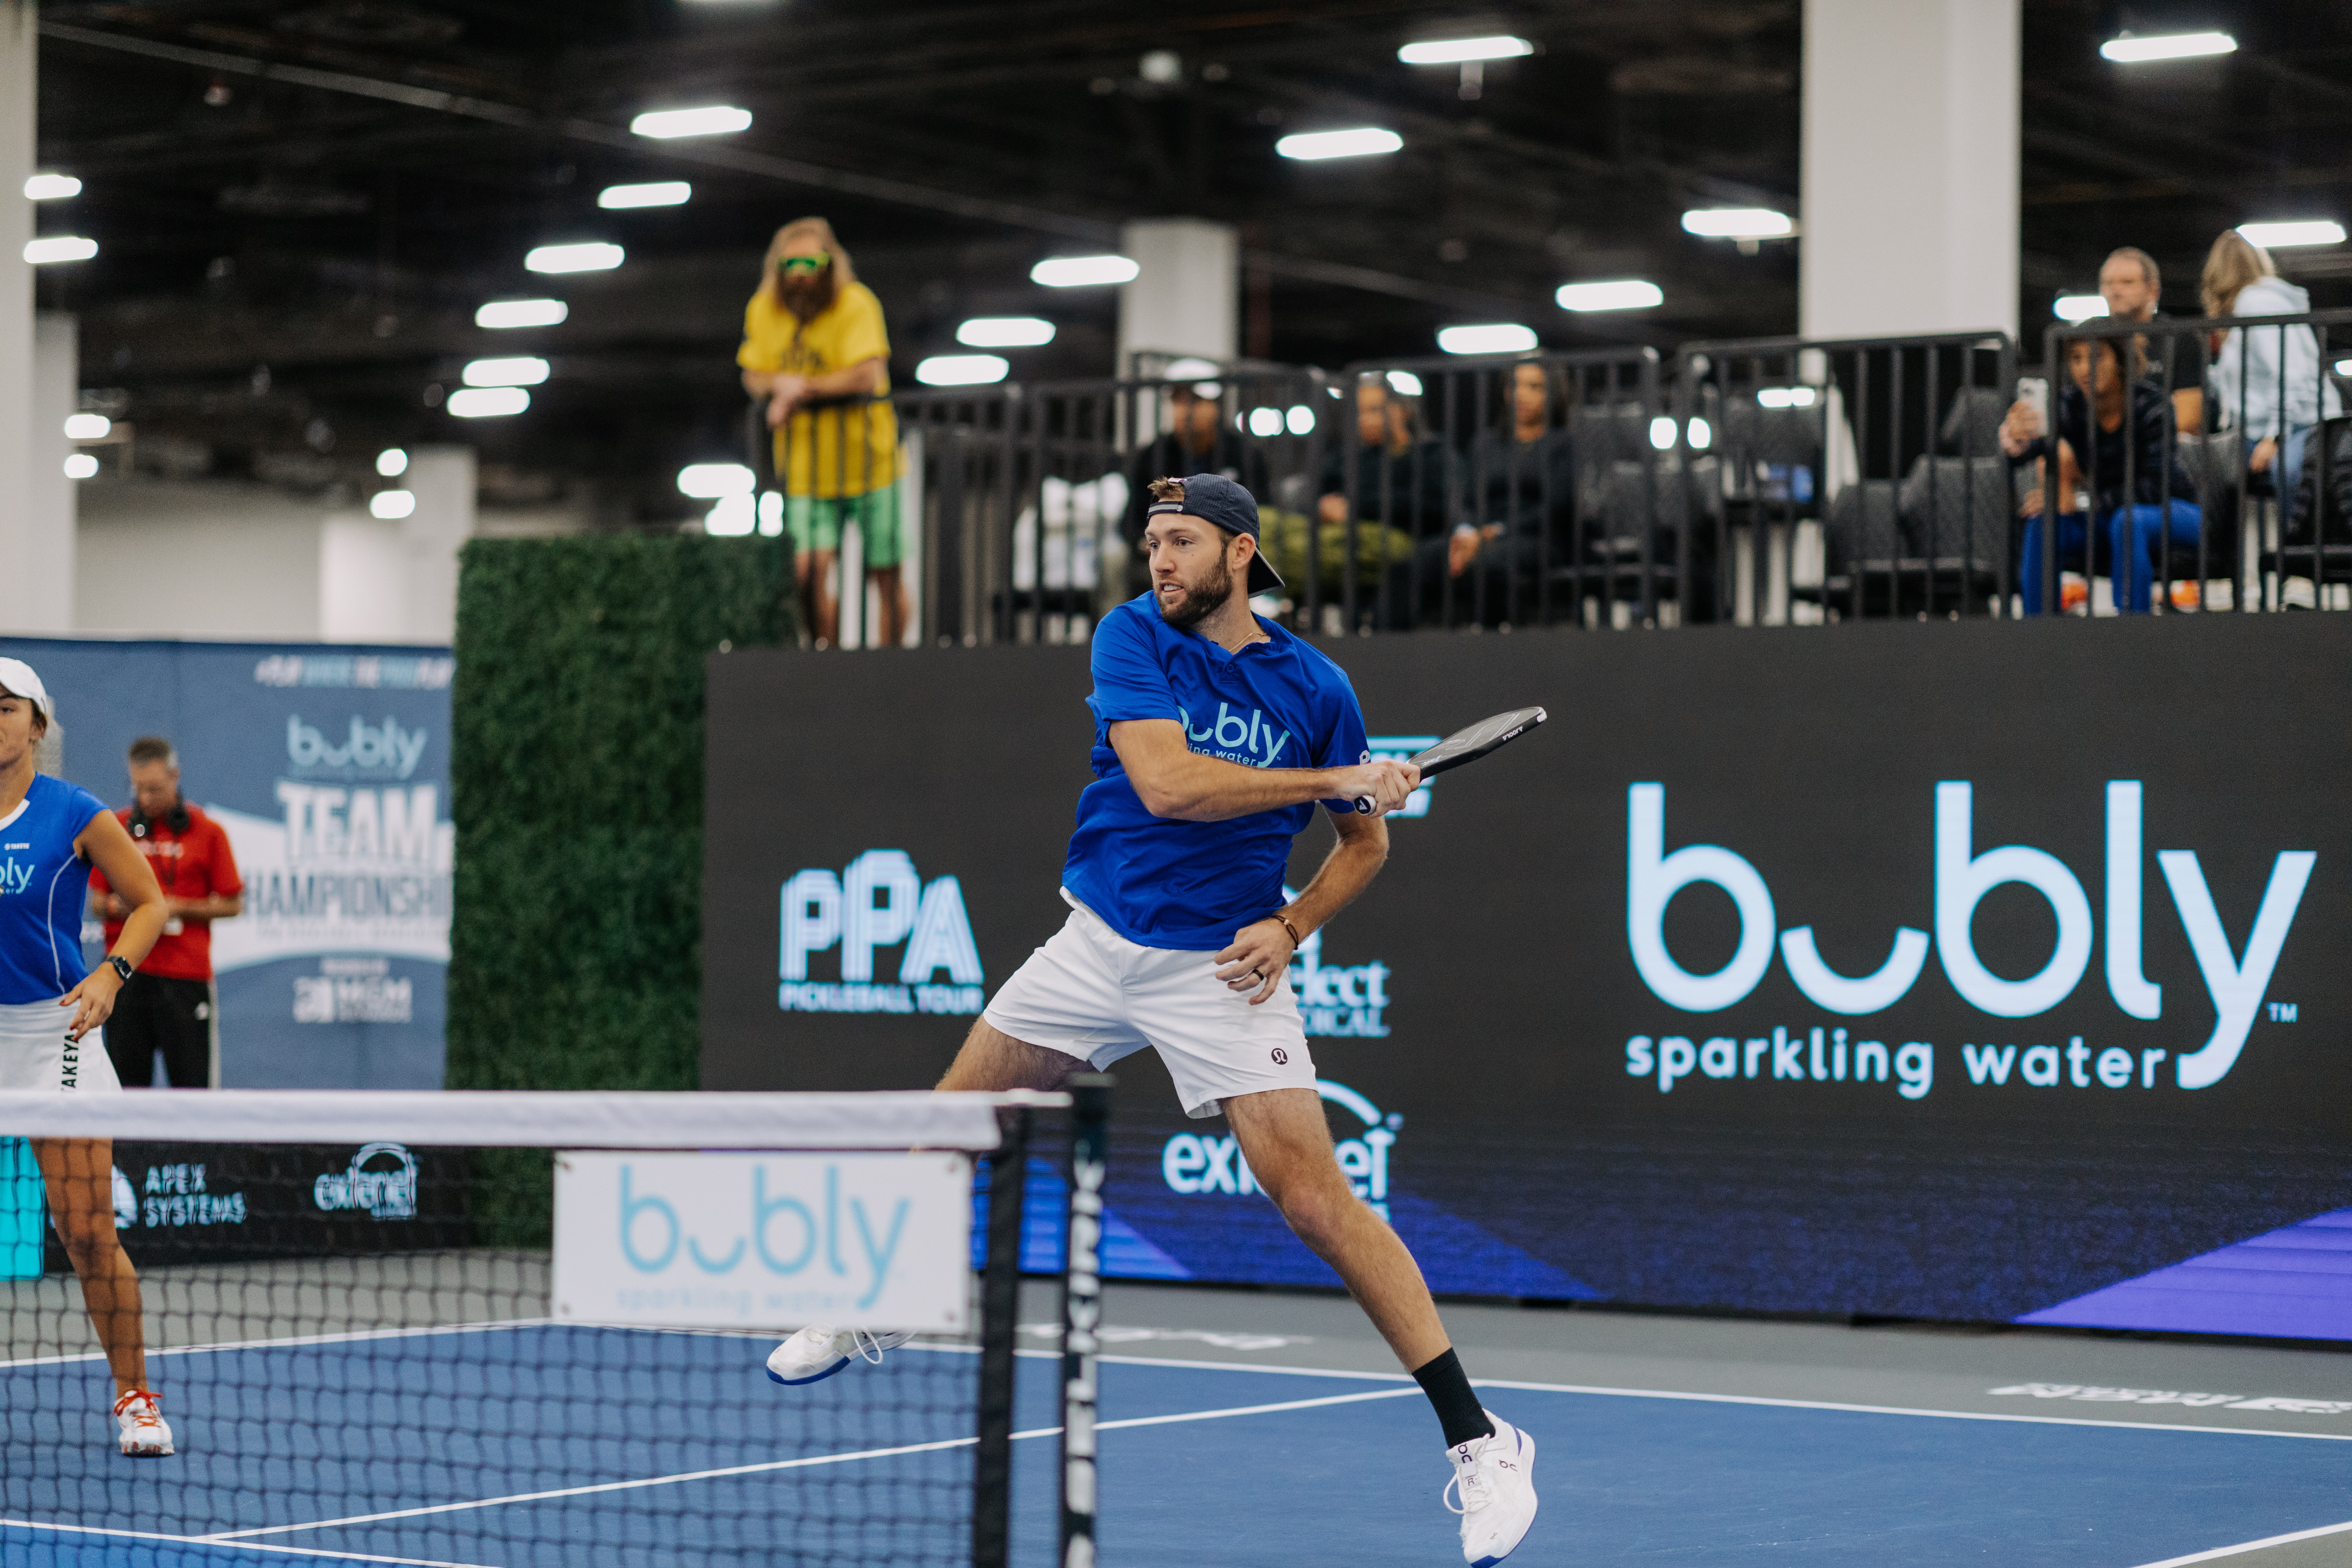 Phelps, Fitzgerald compete with pros in growing sport of pickleball